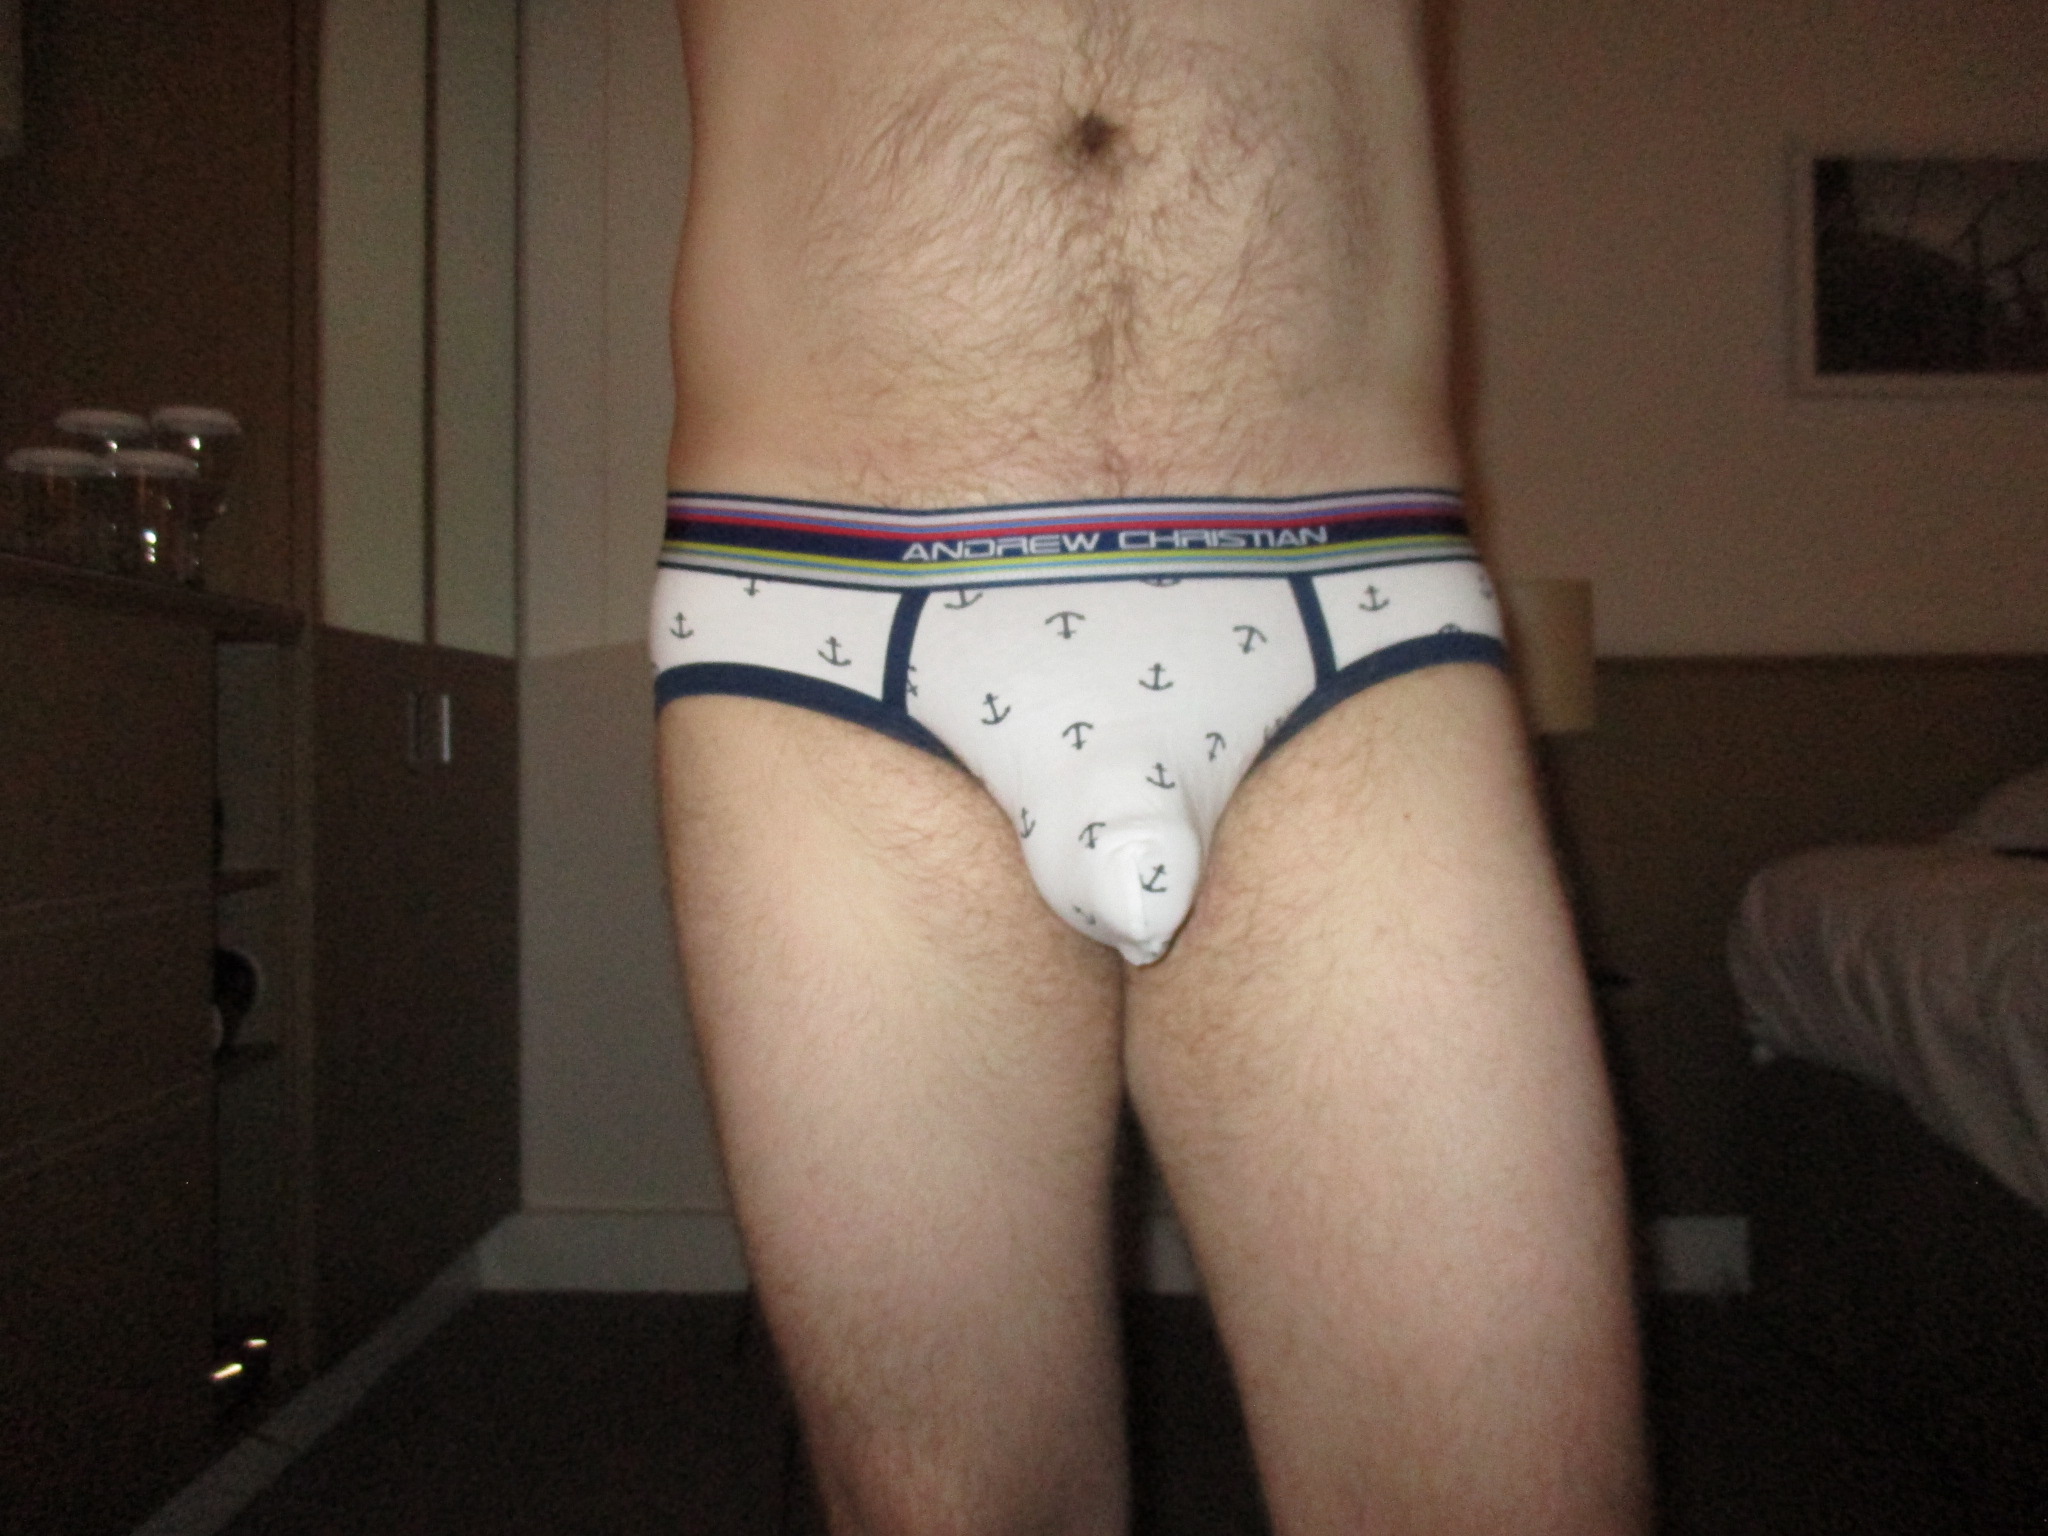 Anchors Away in these themed briefs…